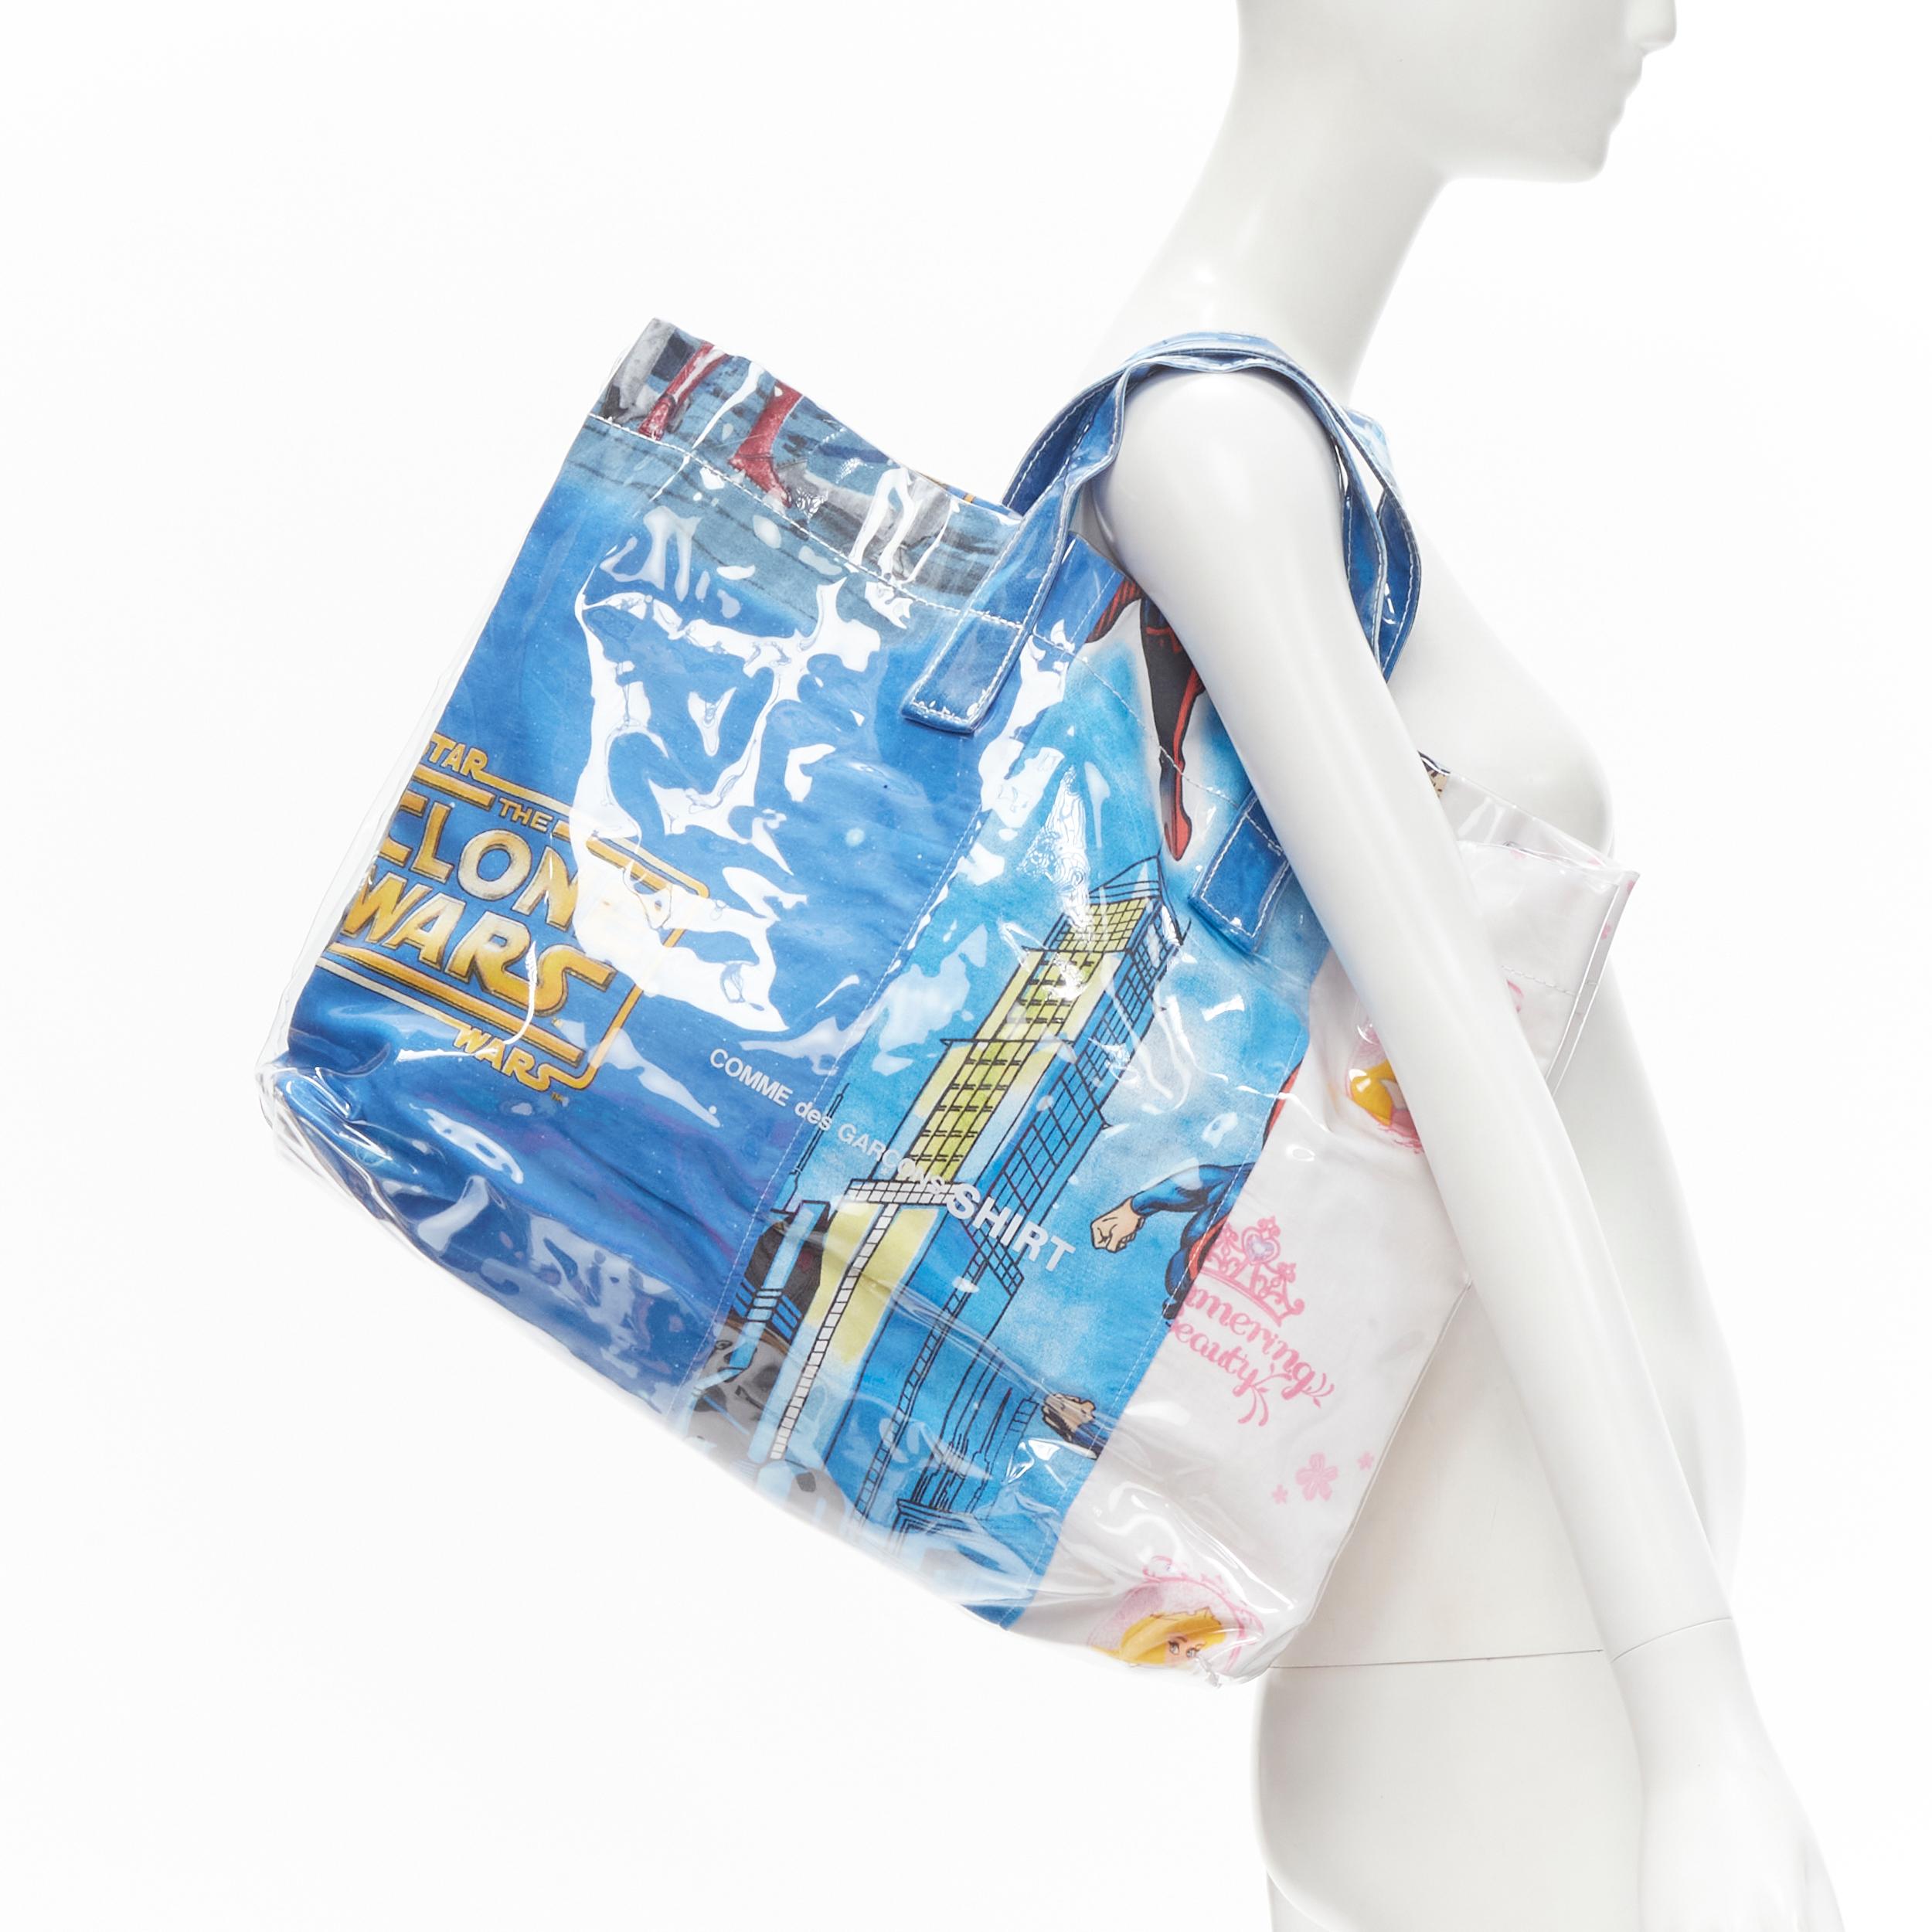 COMME DES GARCONS SHIRT The Clone Wars Barbie patchwork PVC tote bag 
Reference: ANWU/A00010 
Brand: Comme Des Garcons 
Designer: Rei Kawakubo 
Model: PVC tote 
Material: PVC 
Color: Blue 
Pattern: Patchwork 
Extra Detail: Clear PVC coated cotton